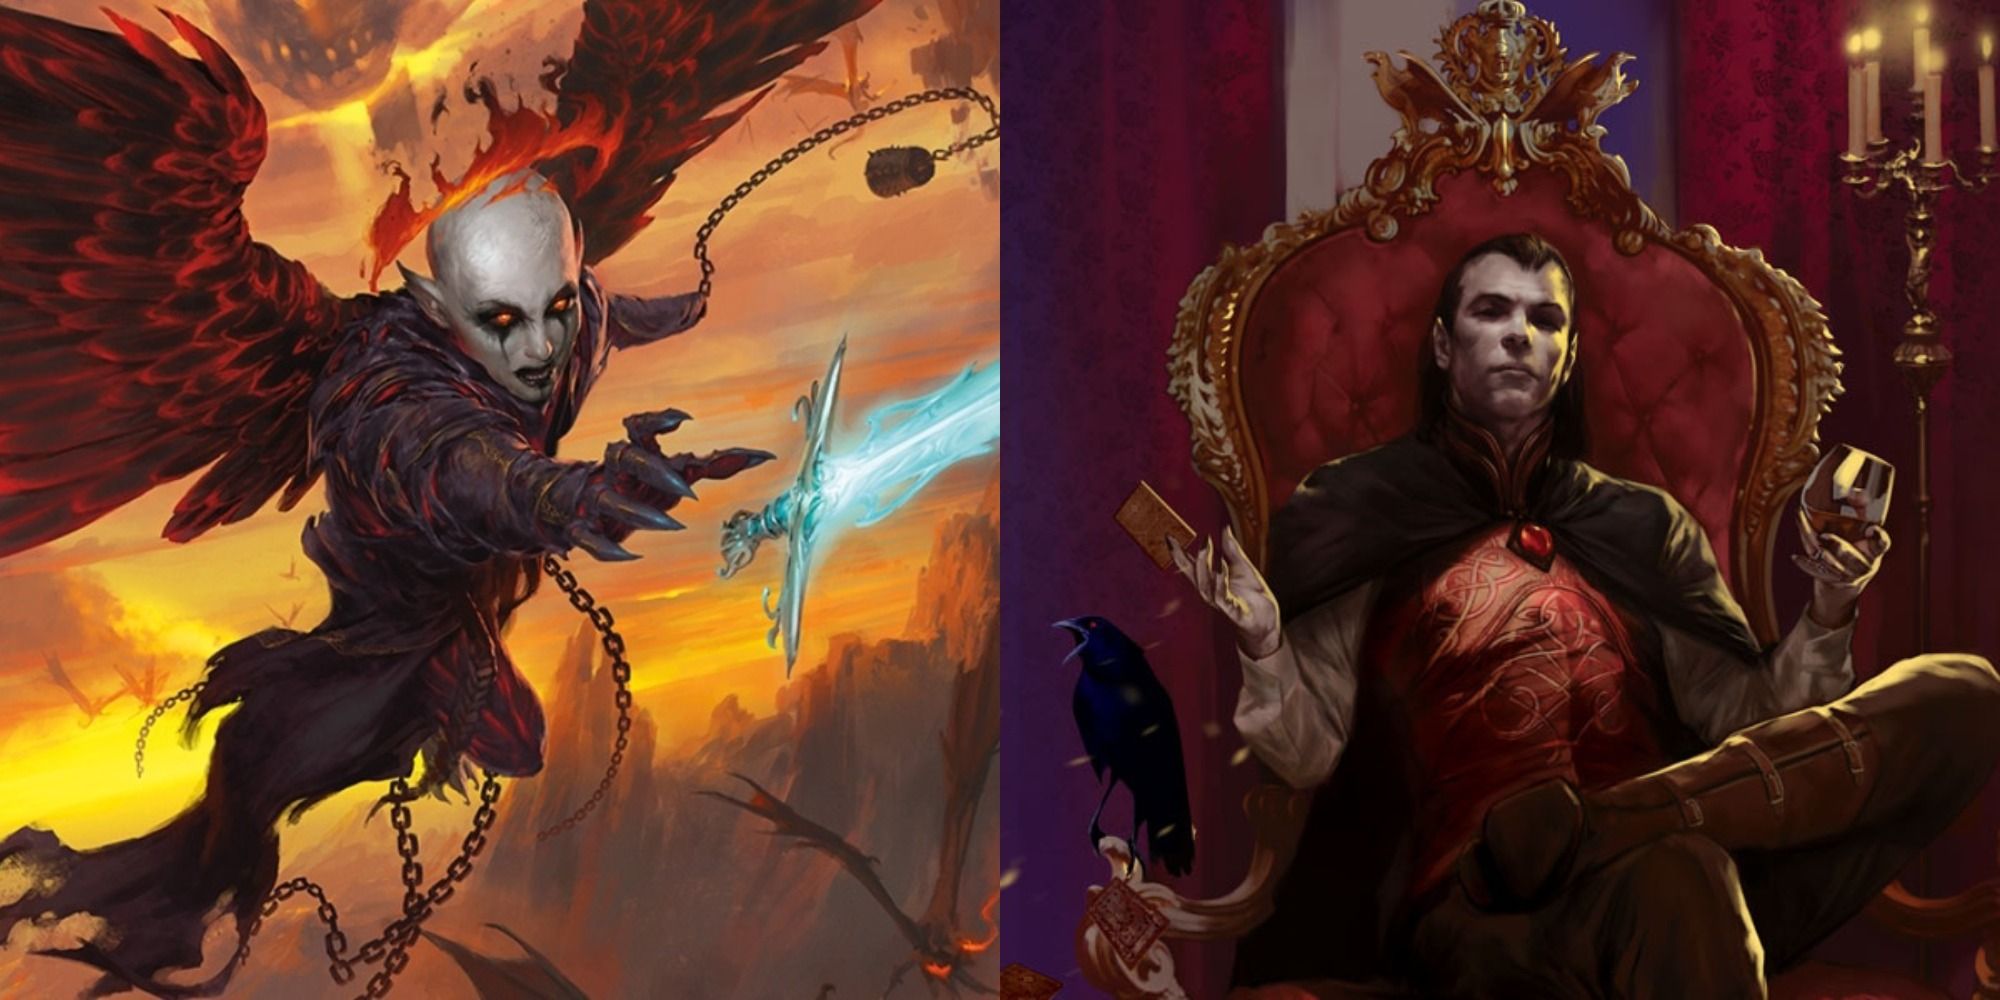 Illustrations from Dungeons and Dragons campaigns Baldur's Gate and The Curse of Strahd